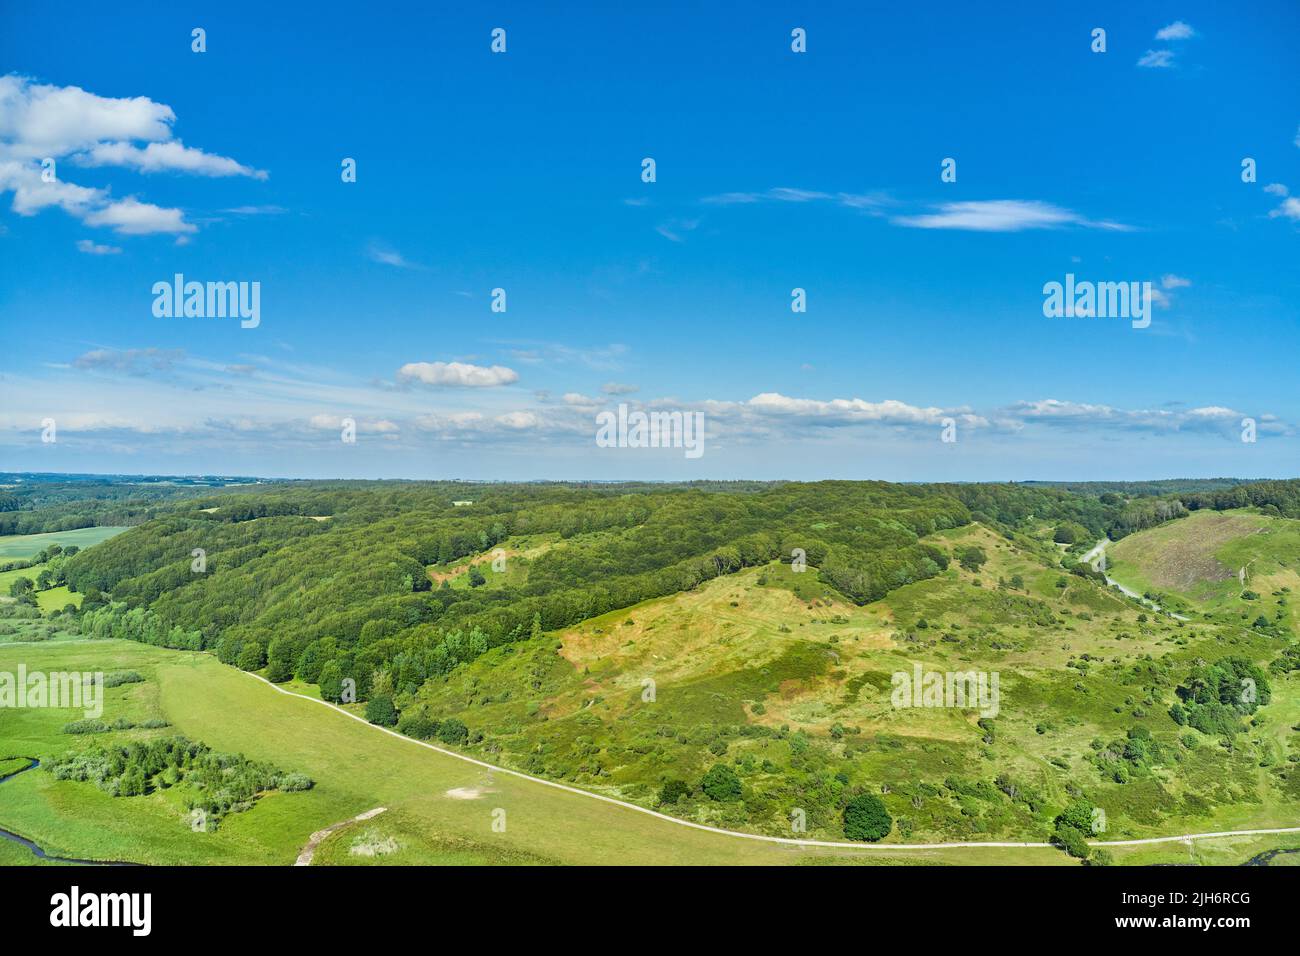 An agricultural landscape with green pasture and hill in summer. Aerial view of a farm with lush grass against a cloudy blue sky with copyspace Stock Photo